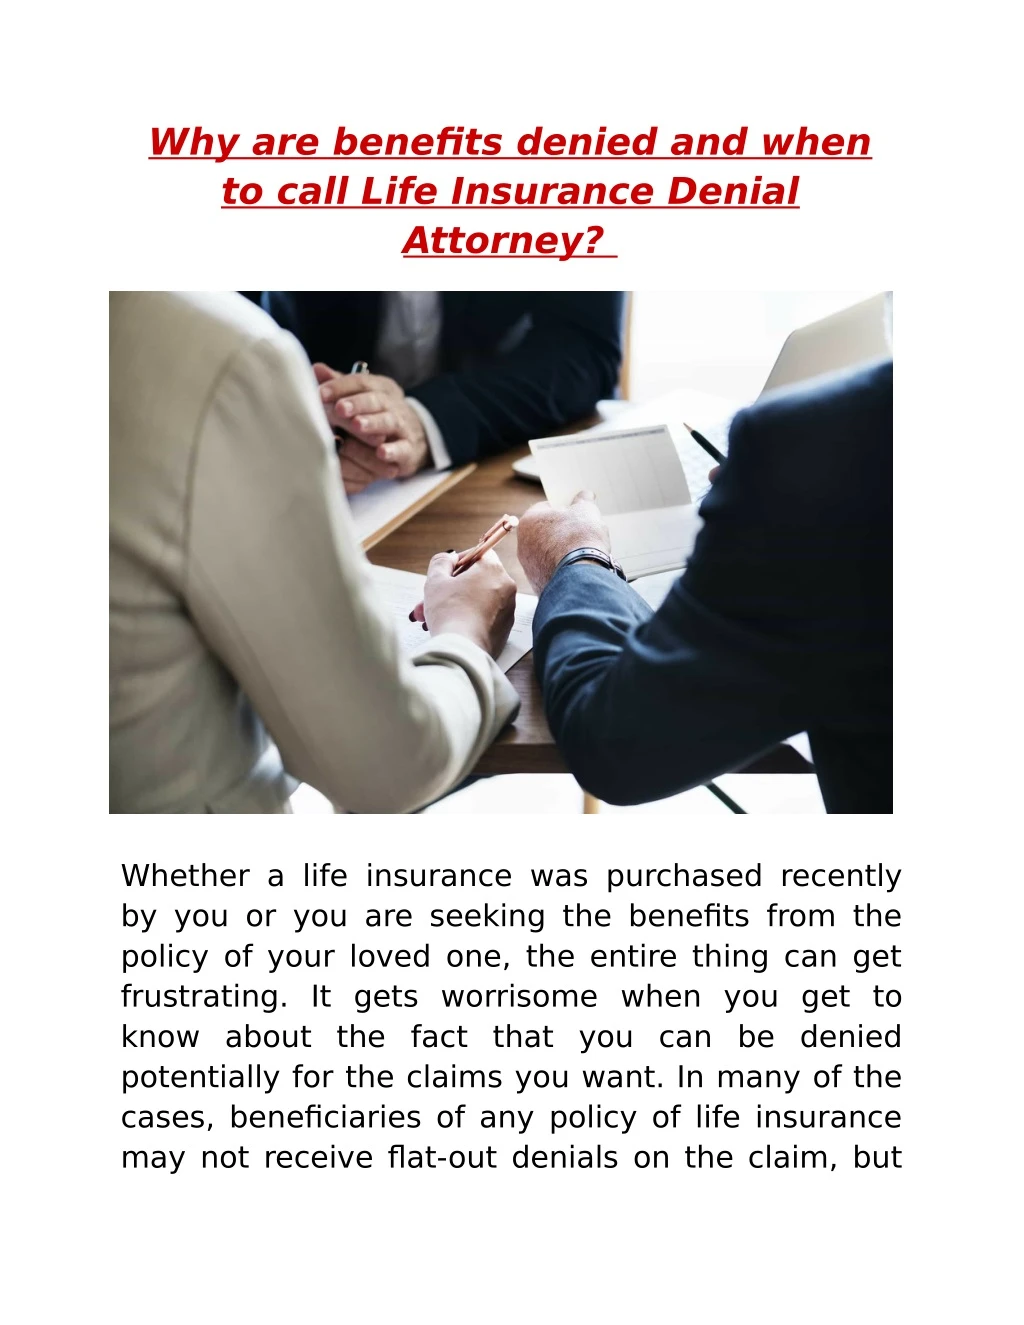 why are benefits denied and when to call life